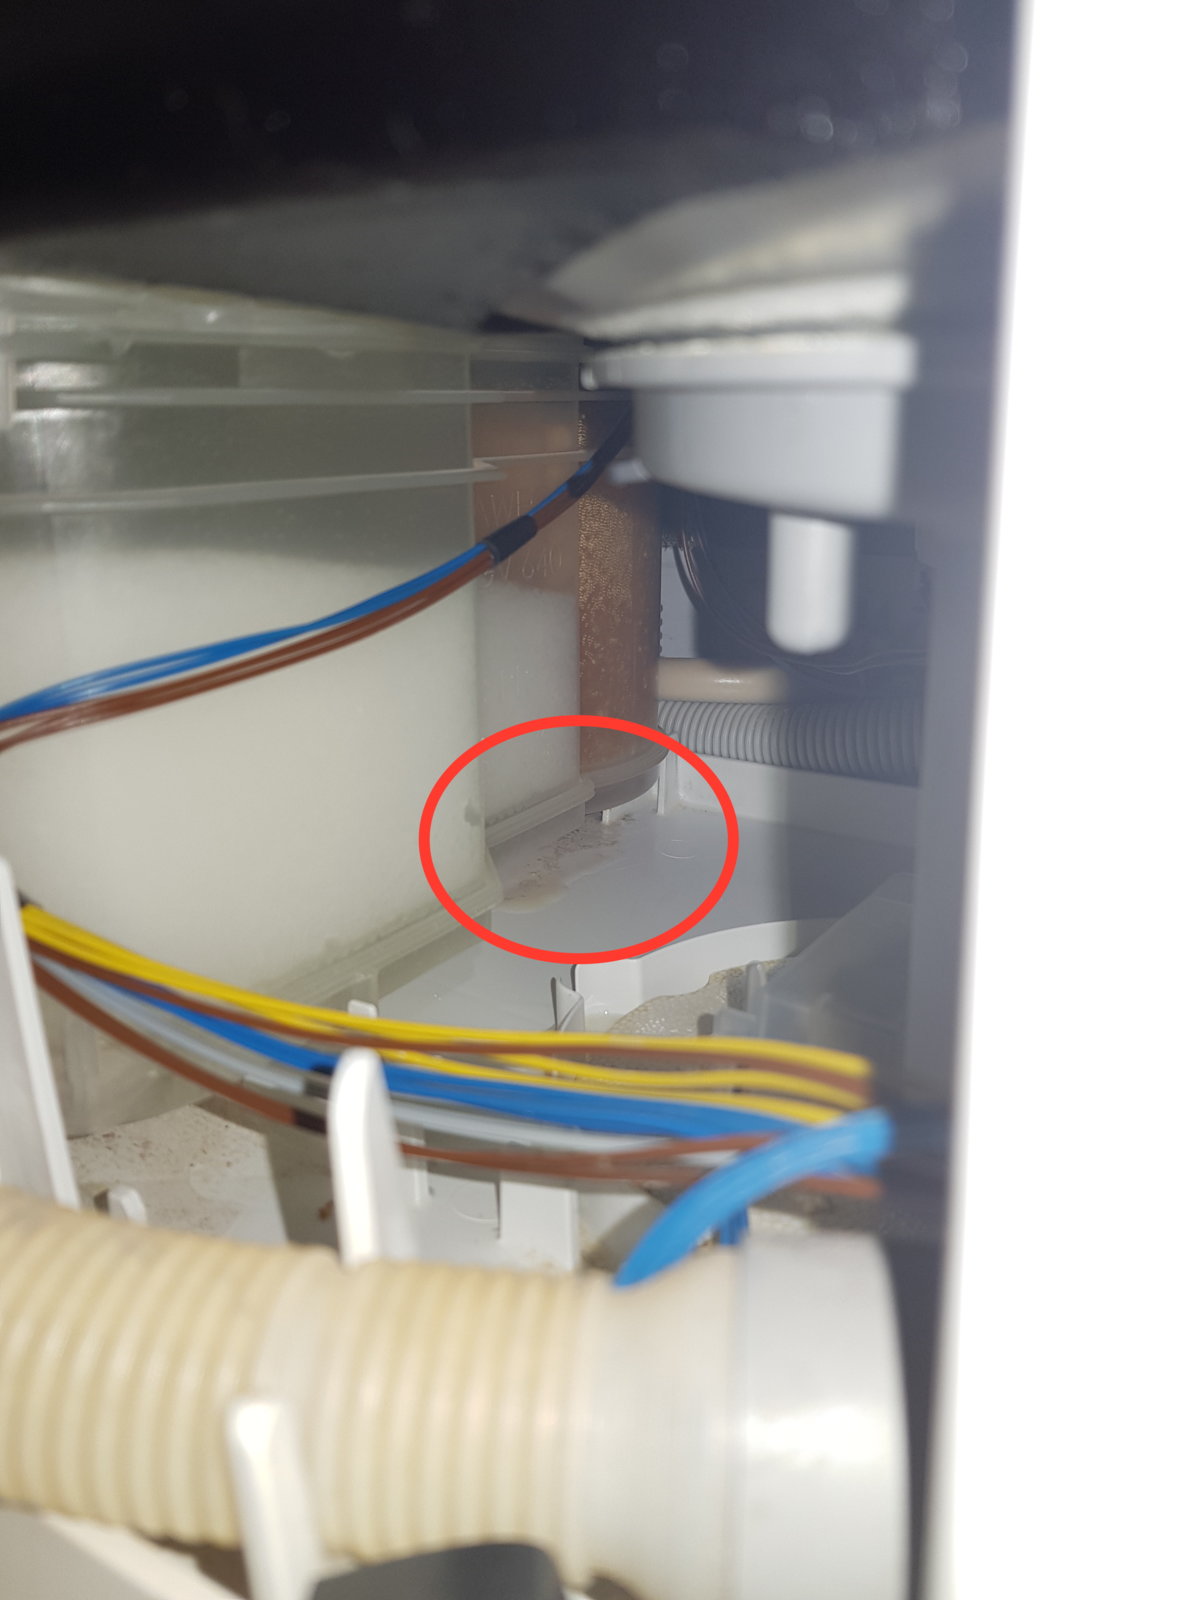 Bosch Dishwasher Leaking, but from 